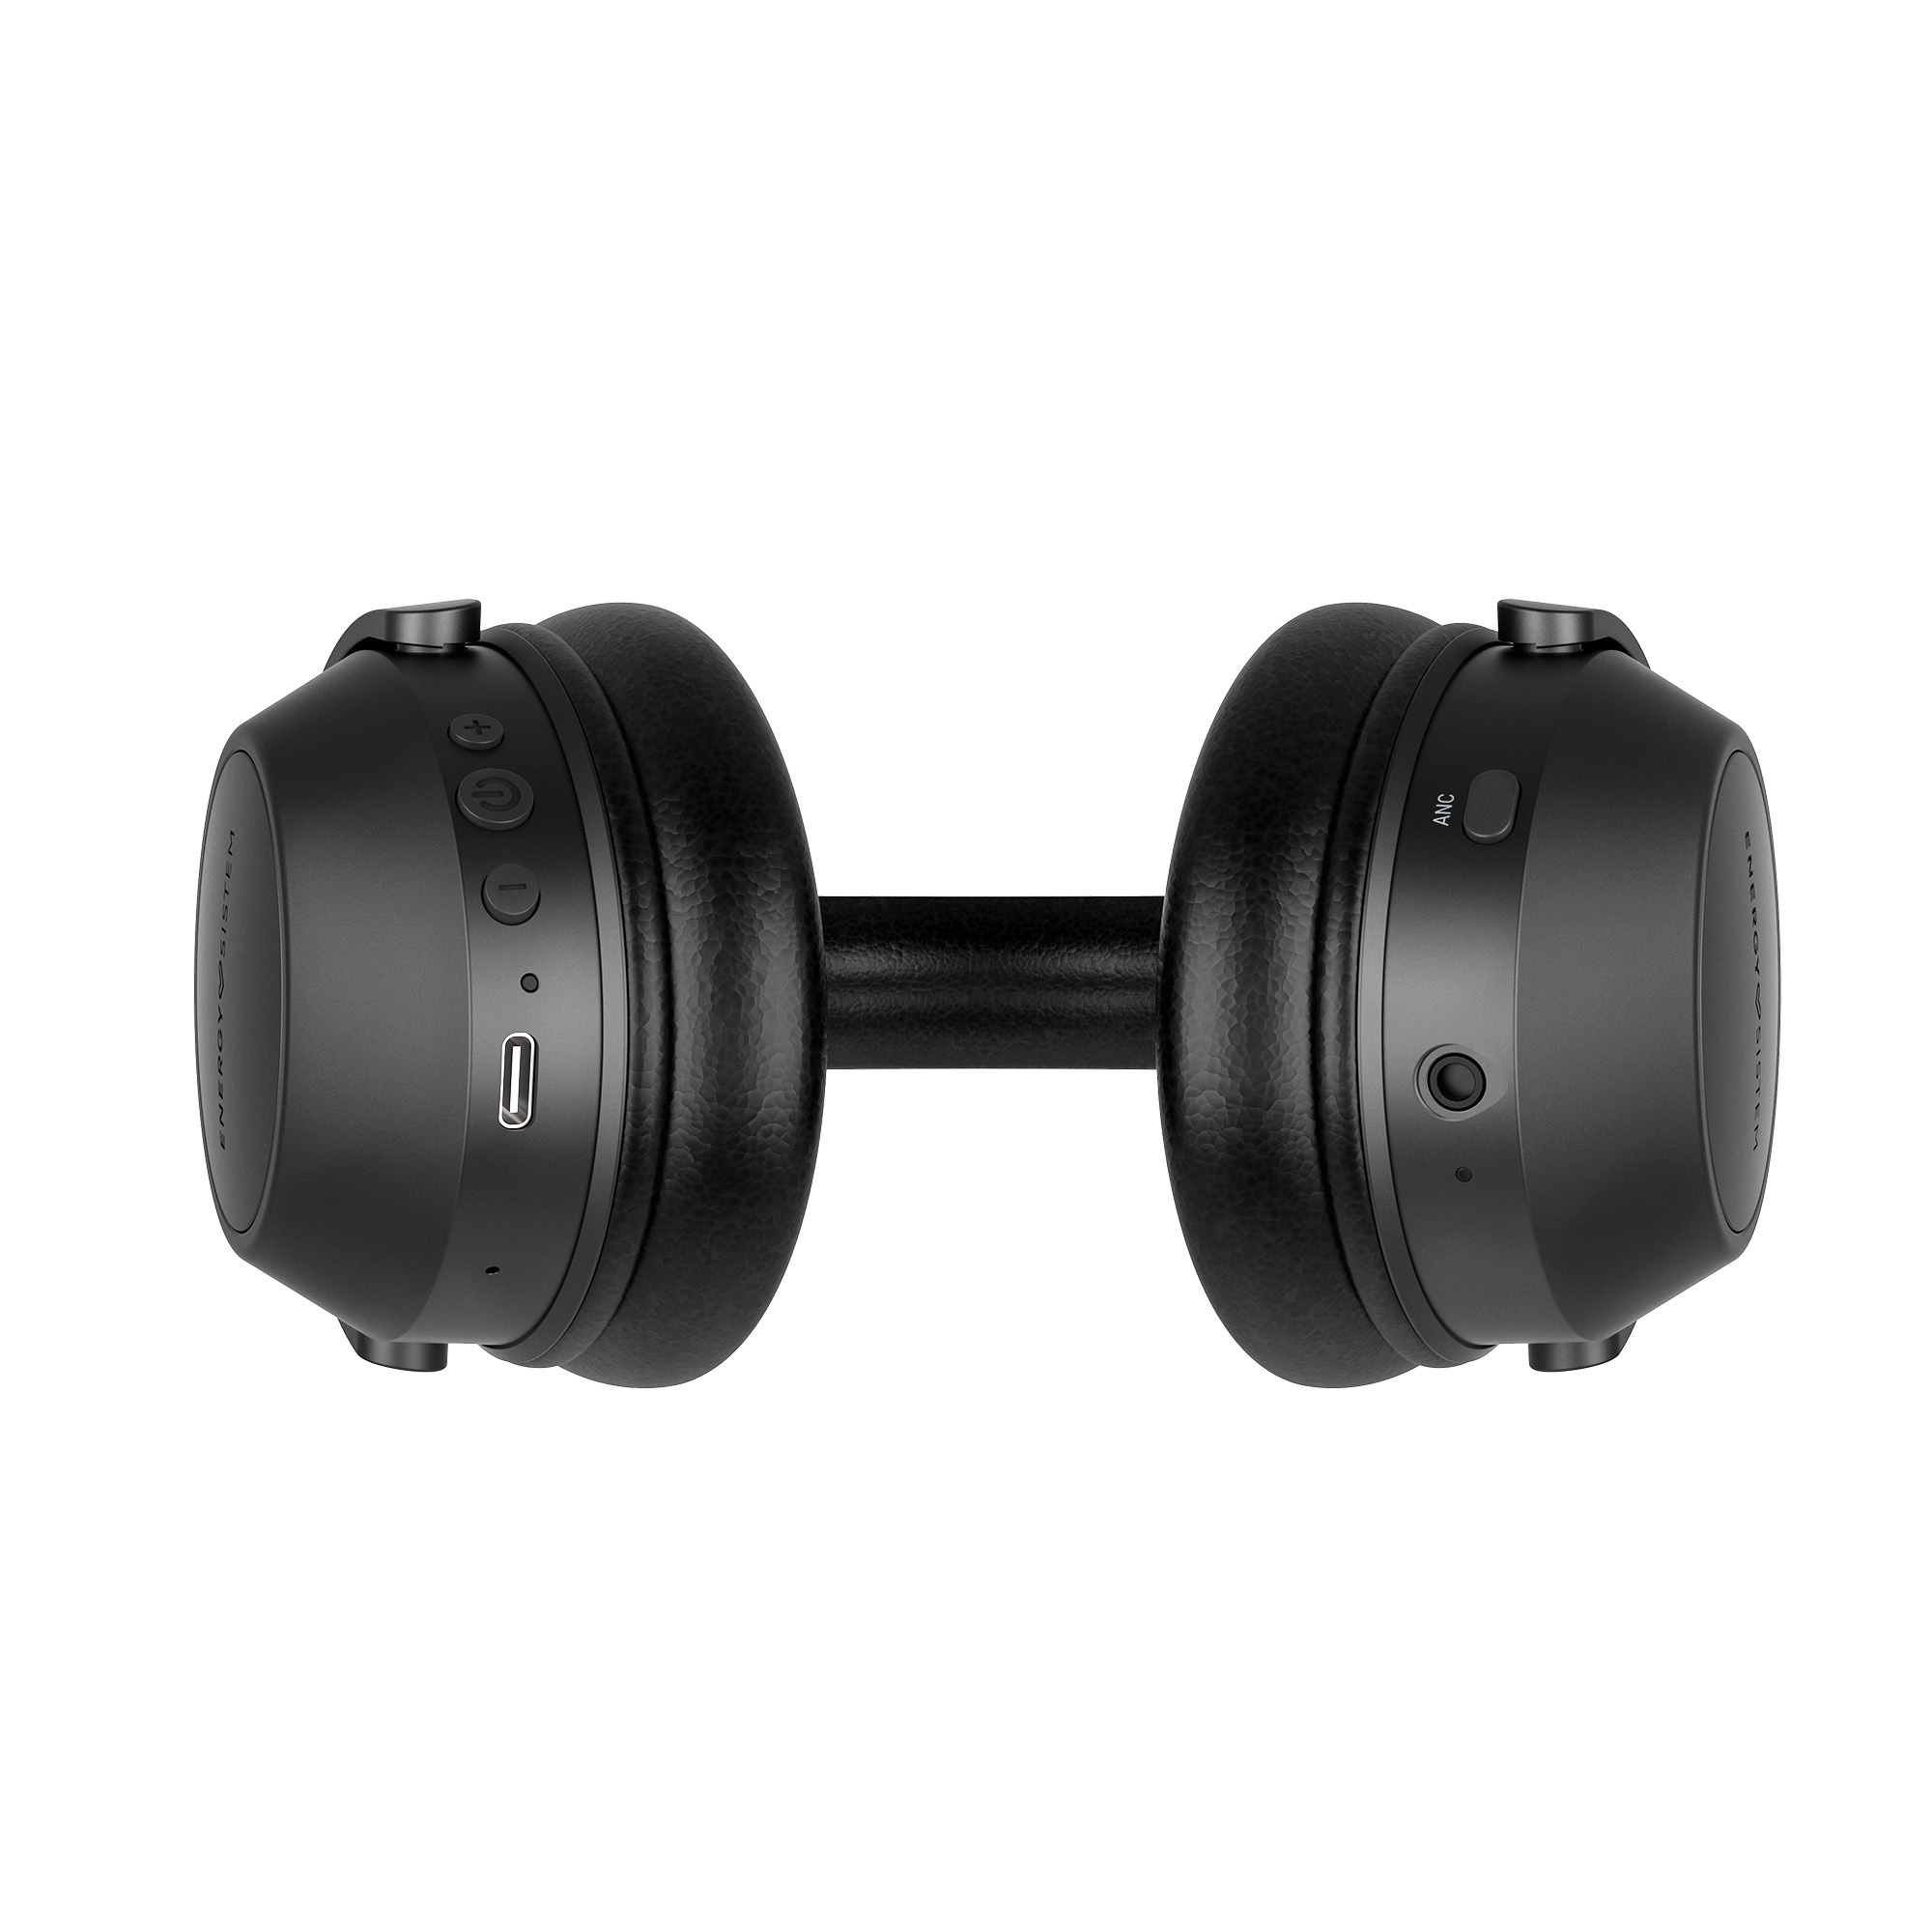 Bluetooth wireless headphones with active noise cancelling